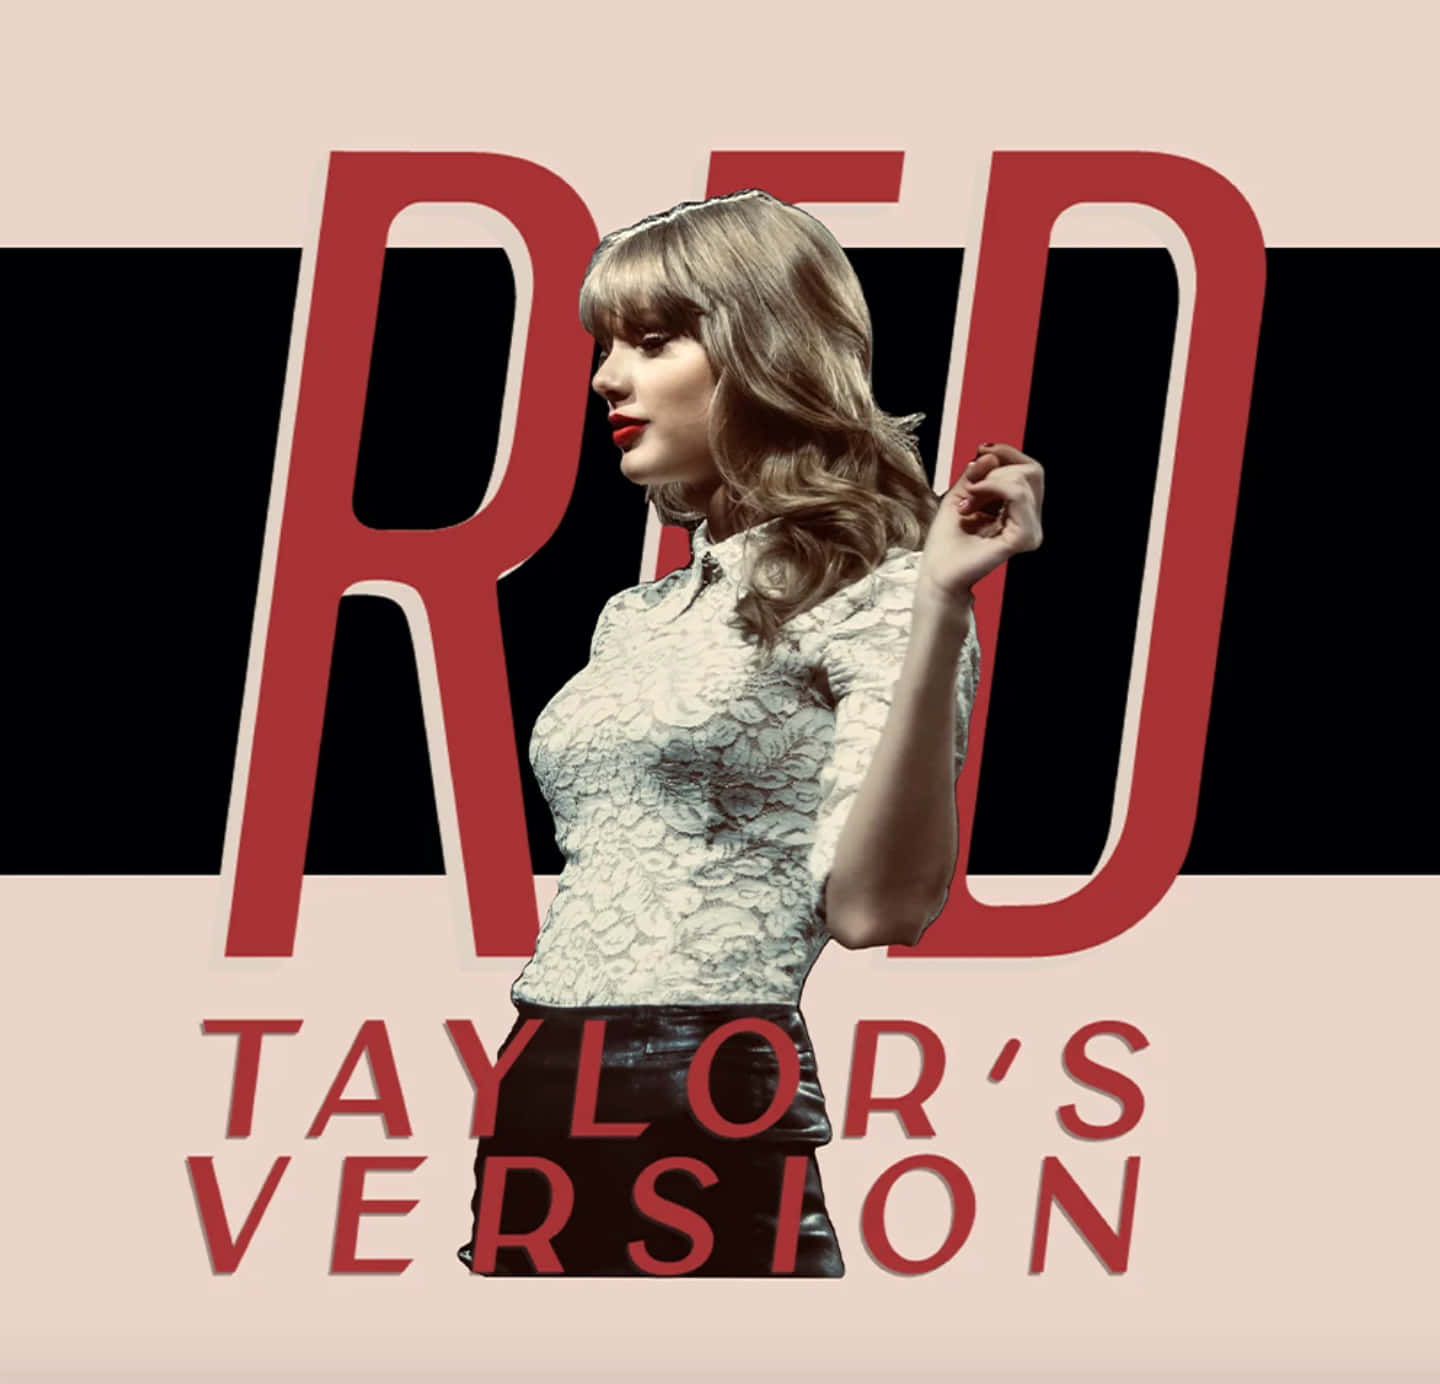 Red Taylors Version Aesthetic Album Cover Wallpaper